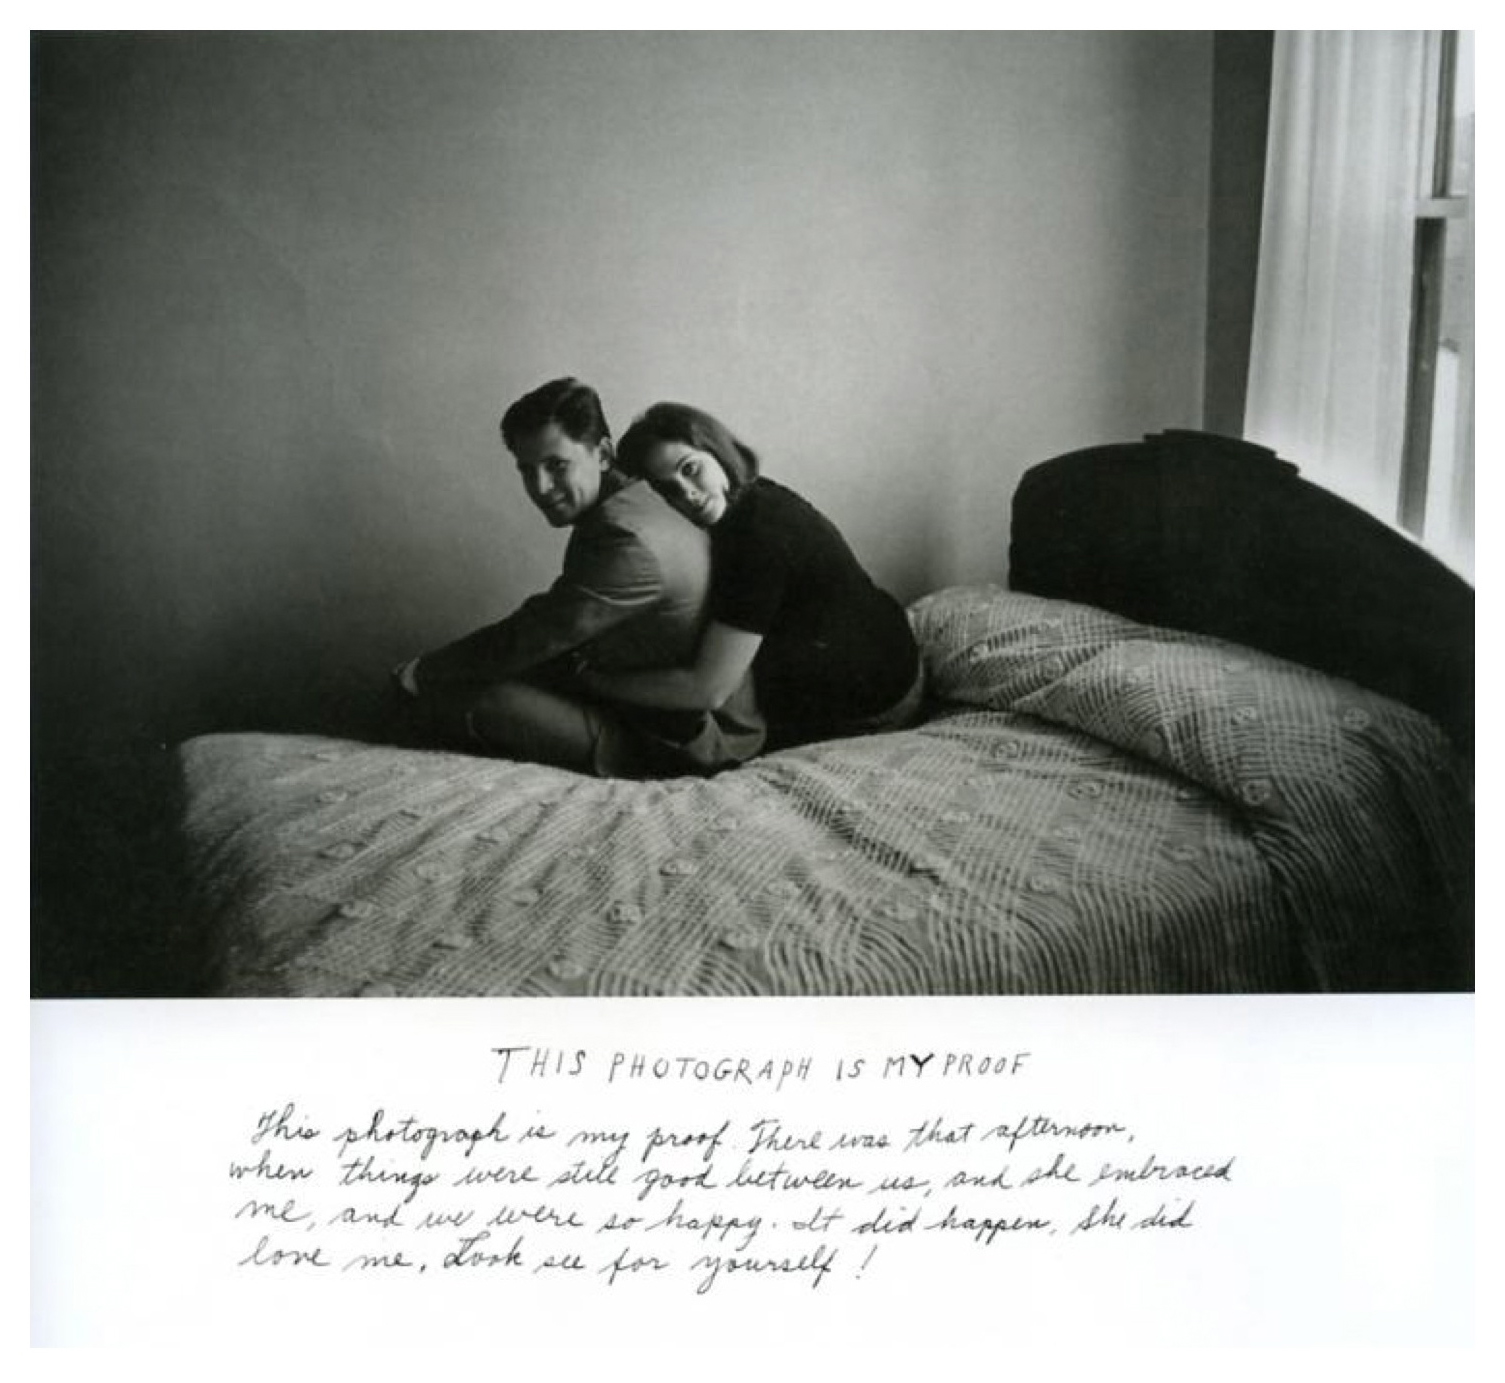 Duane Michals, ‘This photo is my proof' (1974)